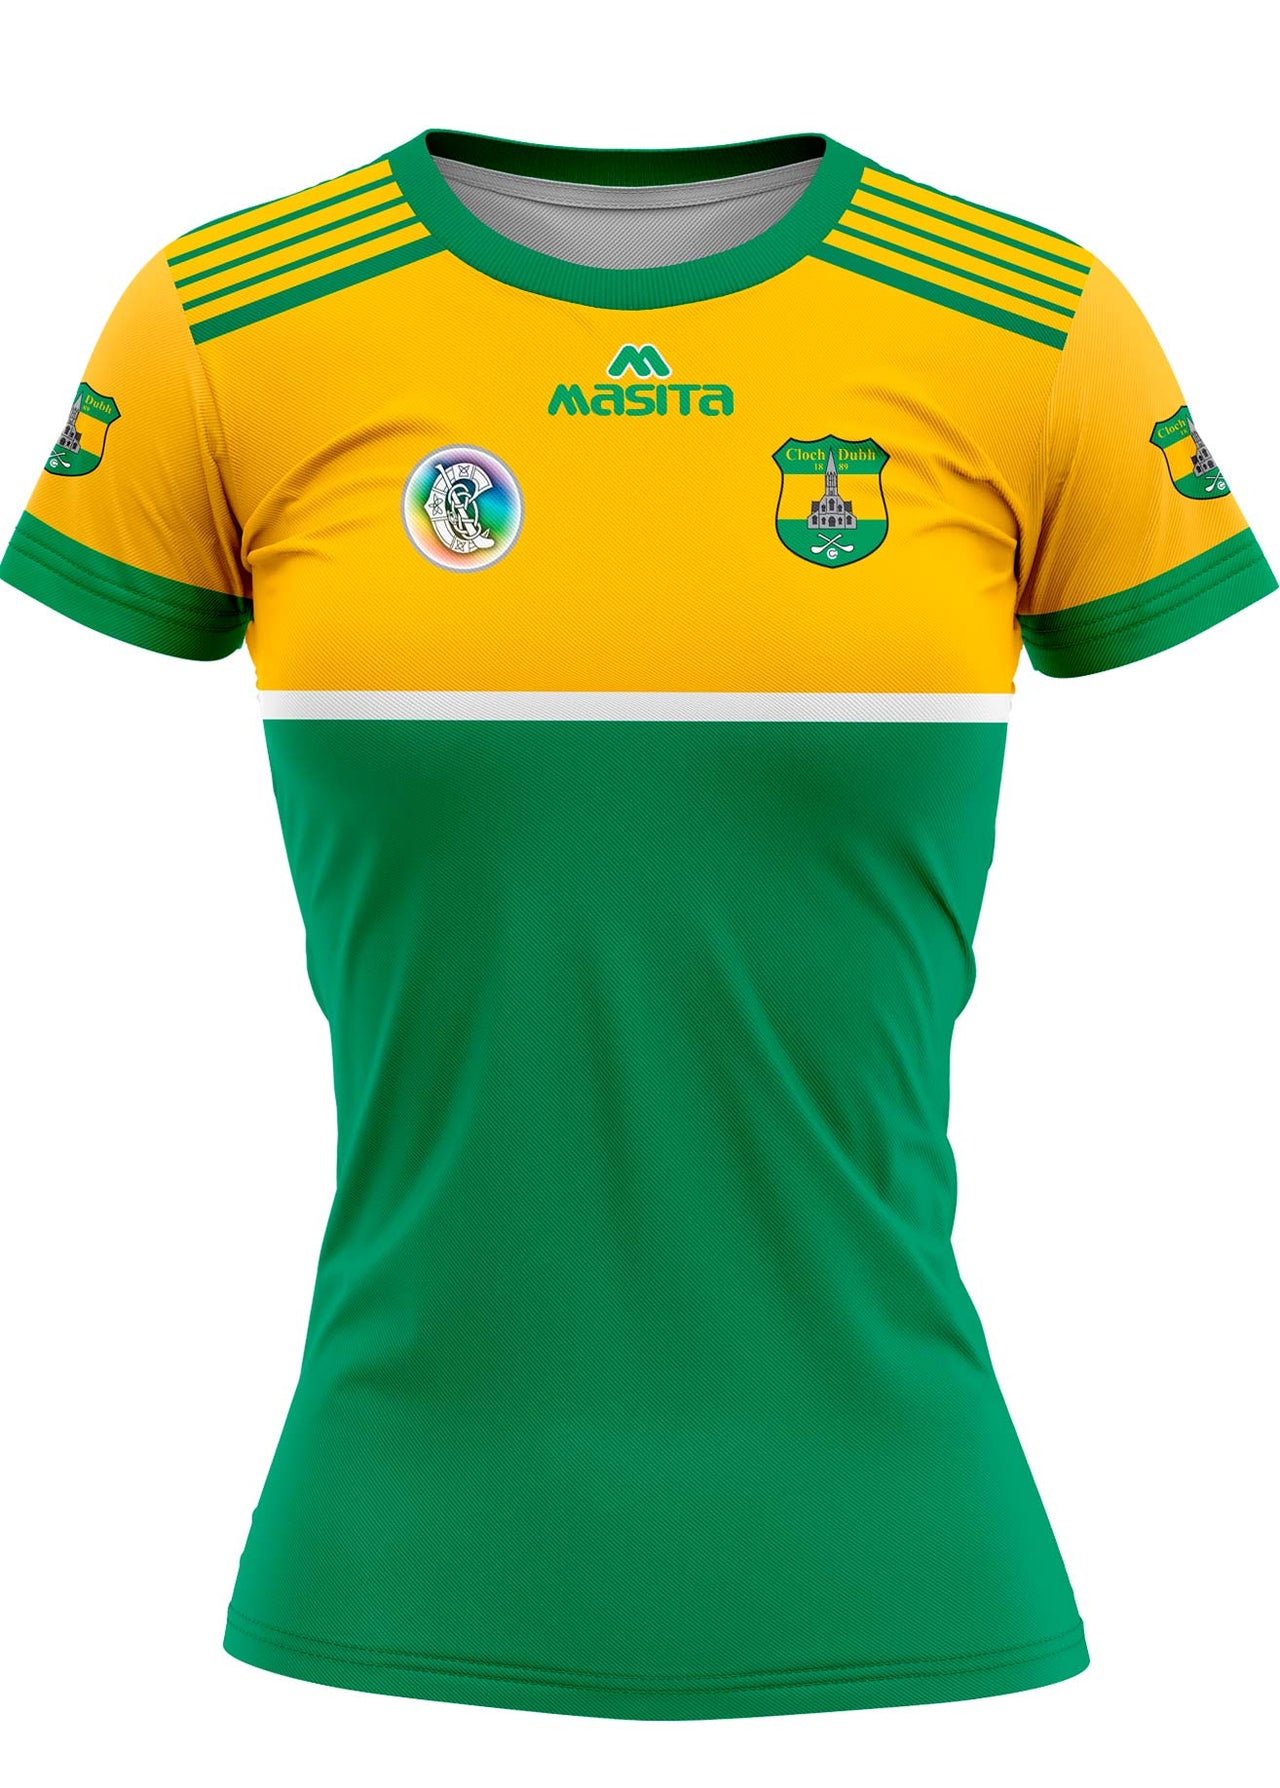 Cloughduv Camogie Home Jersey Regular Fit Adult